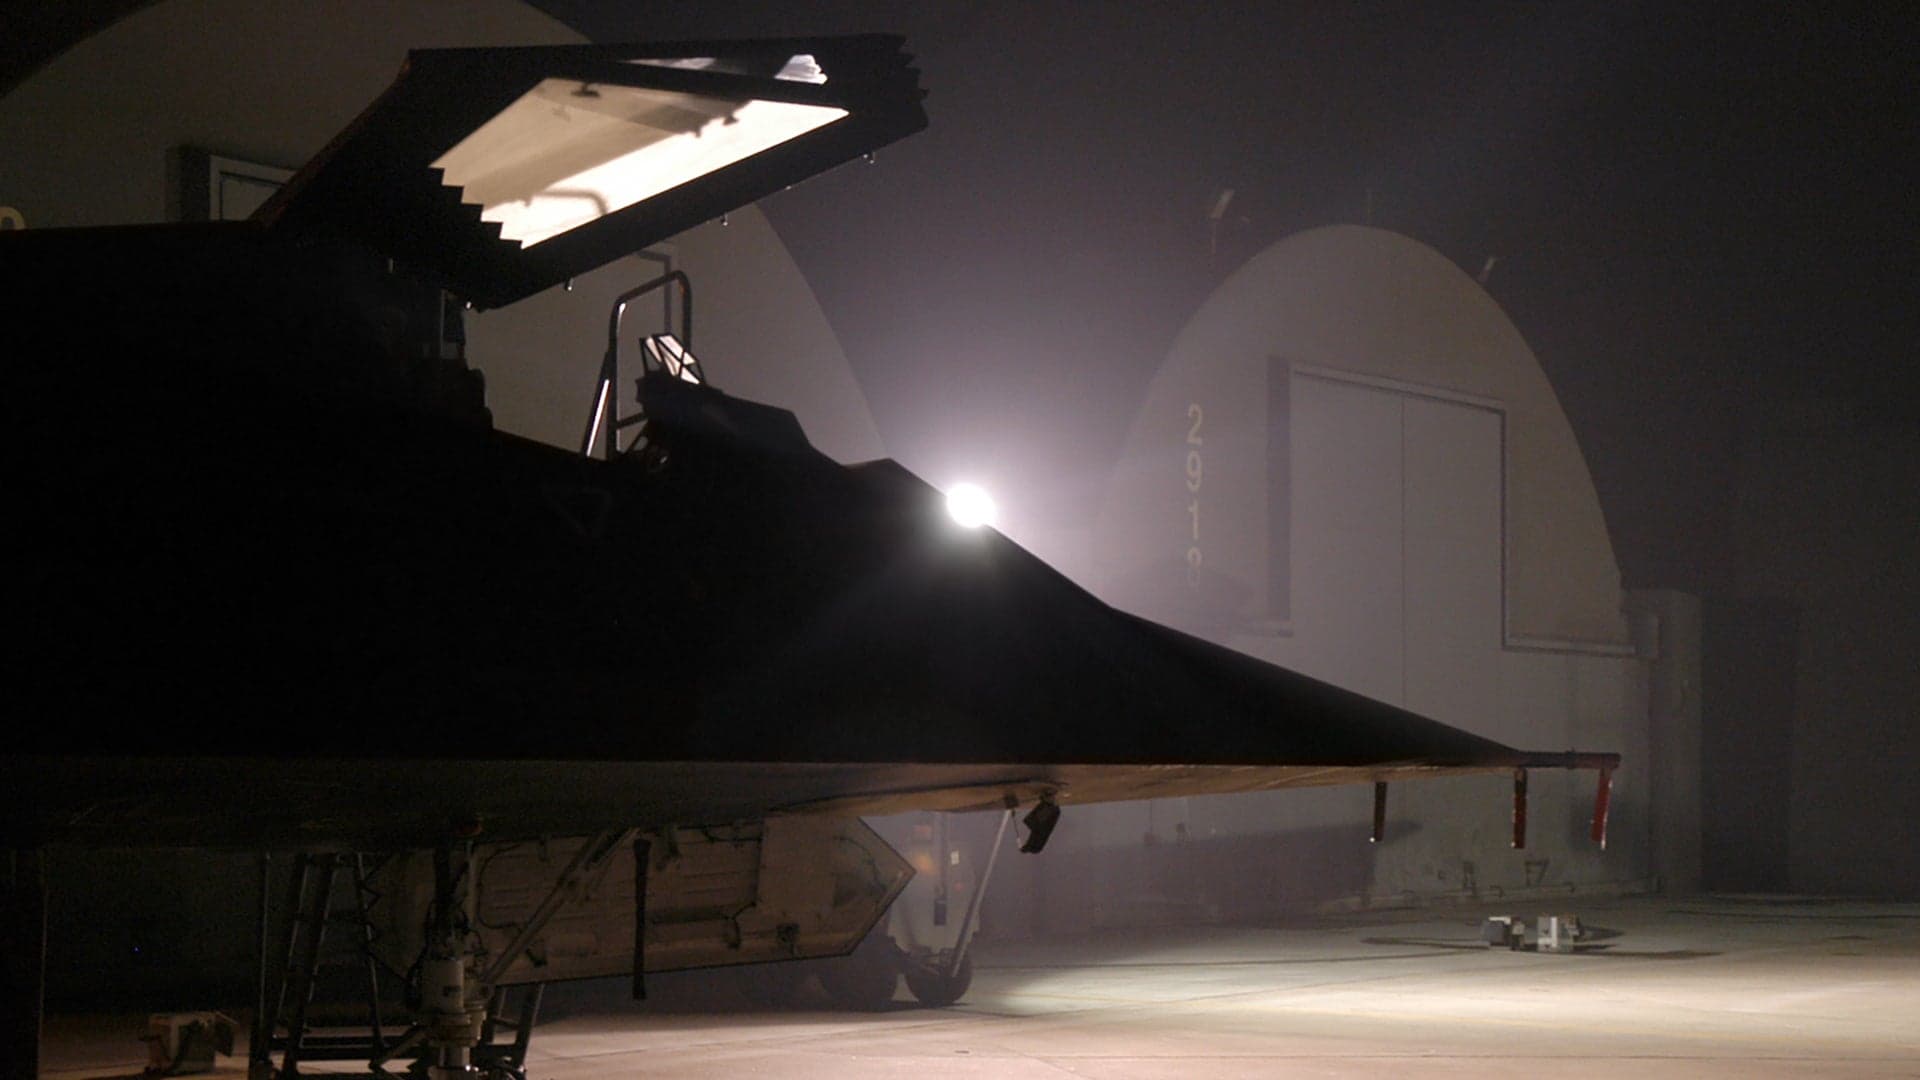 Let’s Talk About The Rumor That F-117s Have Flown Missions In The Middle East Recently